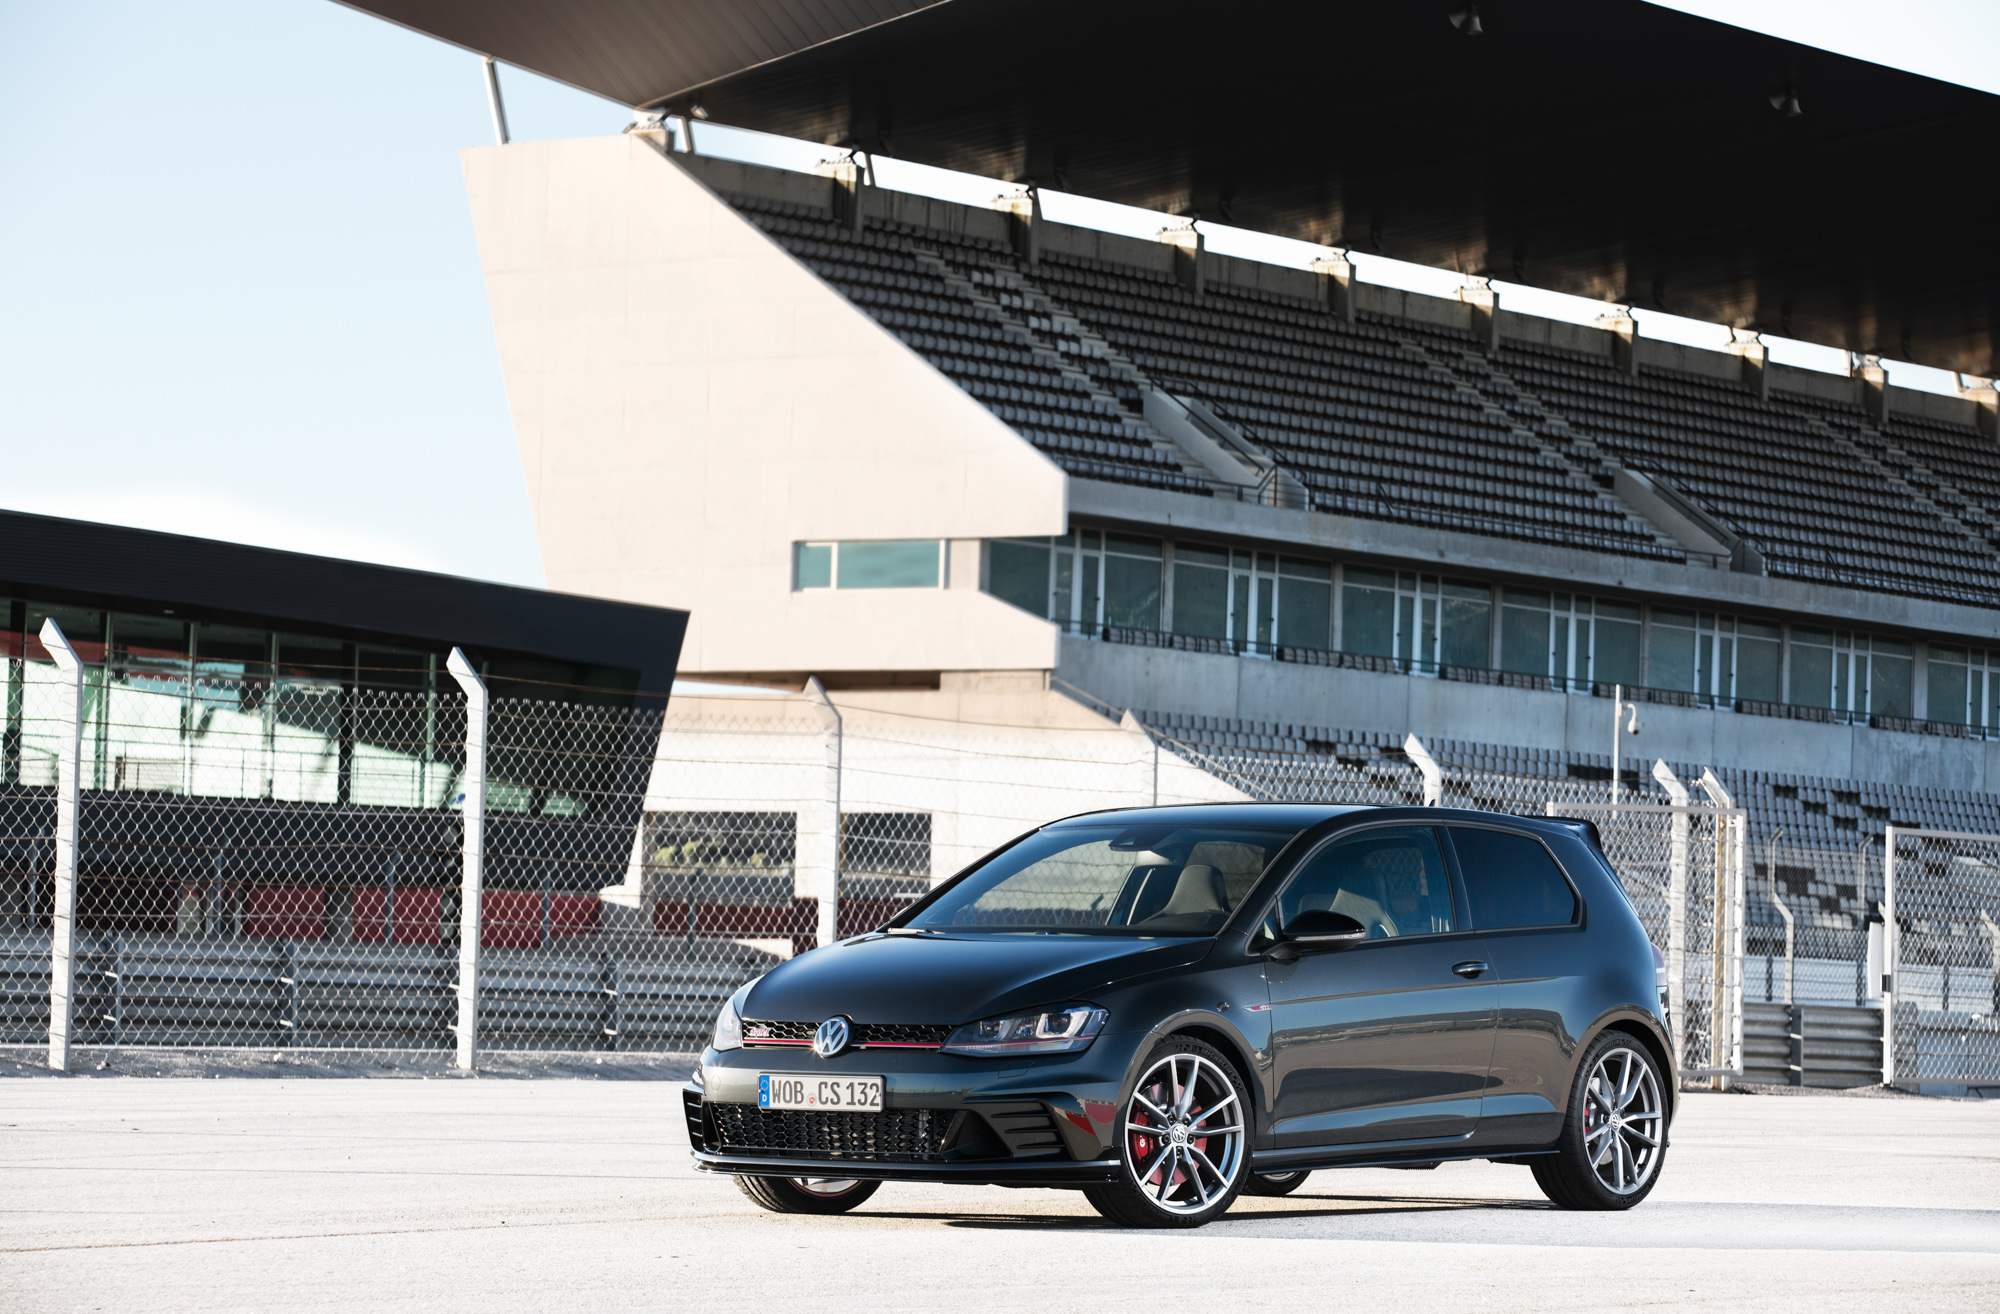 Volkswagen Golf GTI Clubsport review - prices, specs and 0-60 time